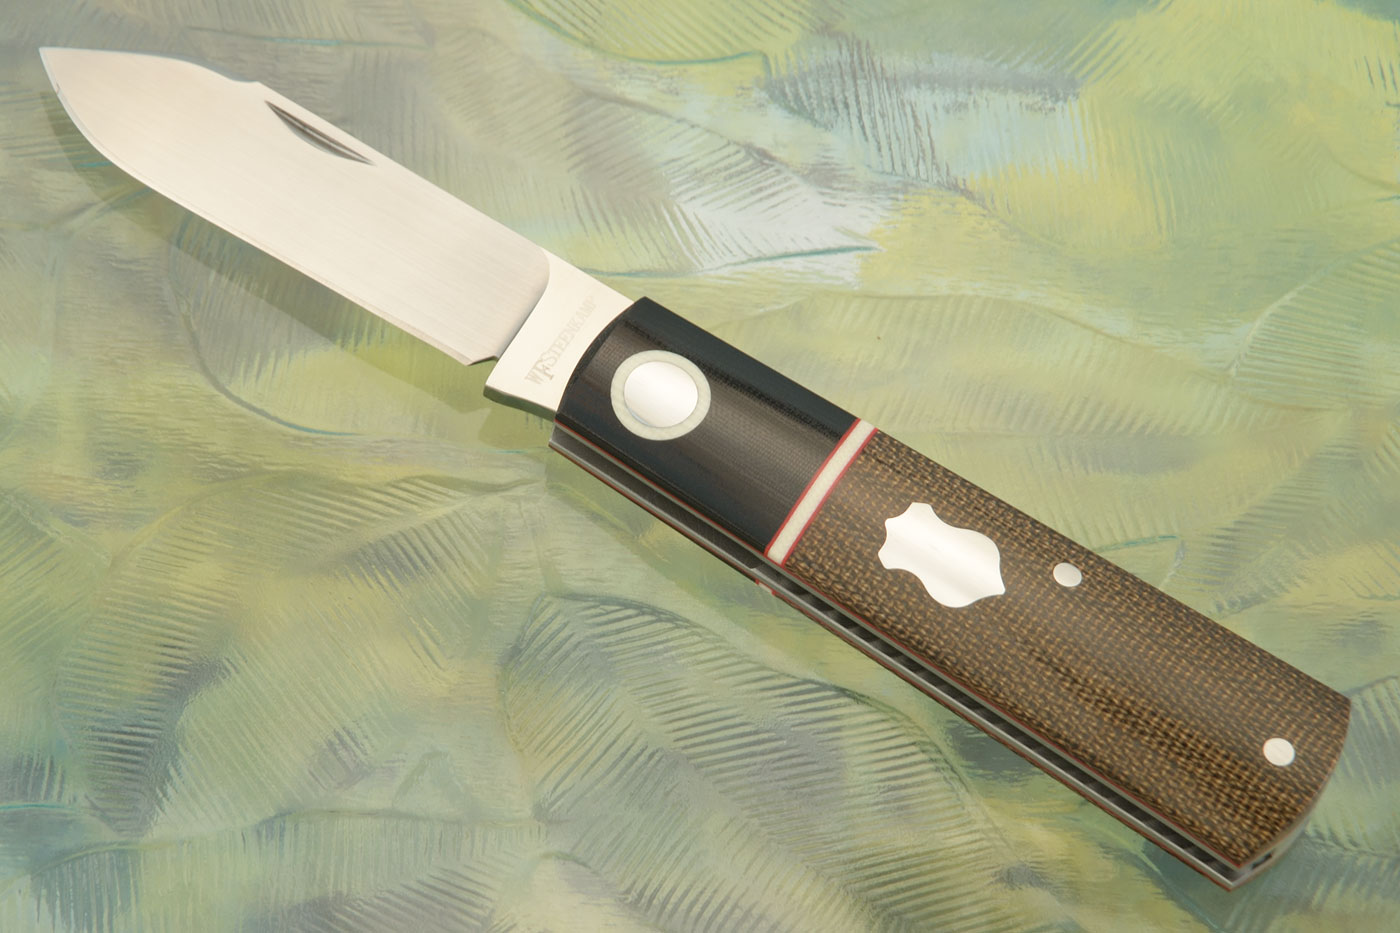 Barlow Slipjoint with Green Micarta and Black G-10 - M390